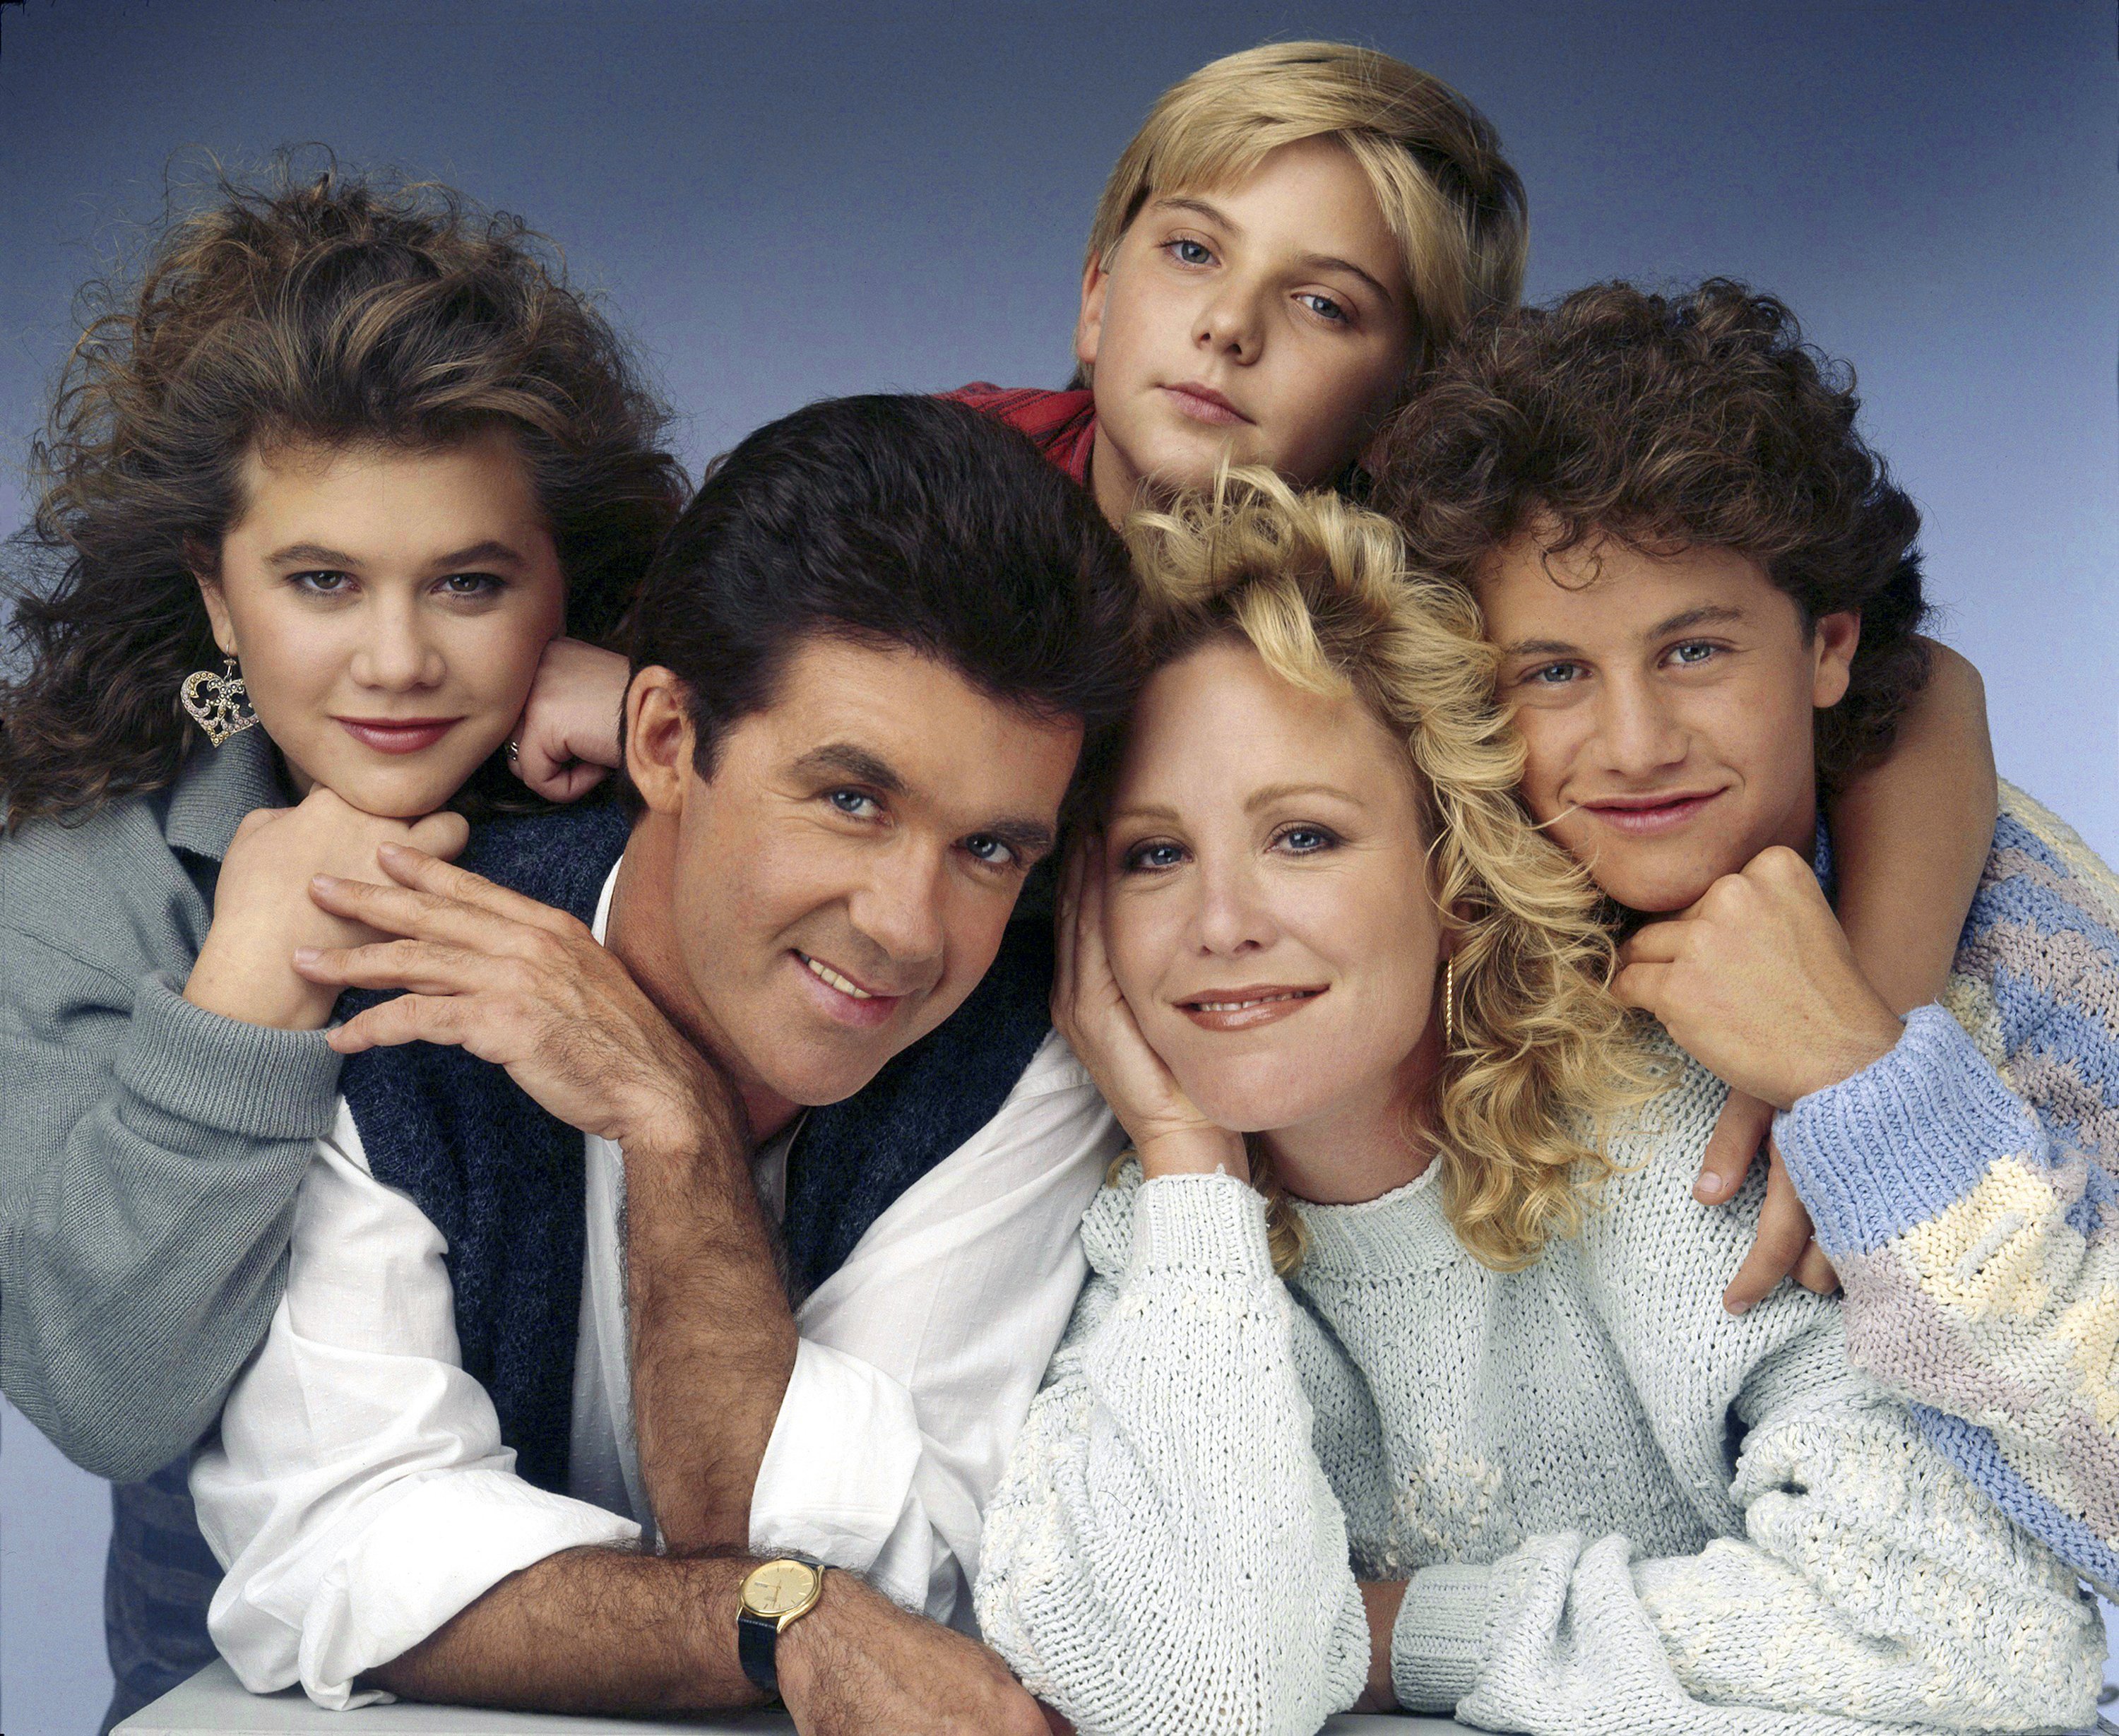 Tracey Gold (Carol), Alan Thicke (Jason), Jeremy Miller (Ben), Joanna Kerns (Maggie), and Kirk Cameron (Mike) on season 3 of "Growing Pains" on October 14, 1987 | Source: Getty Images